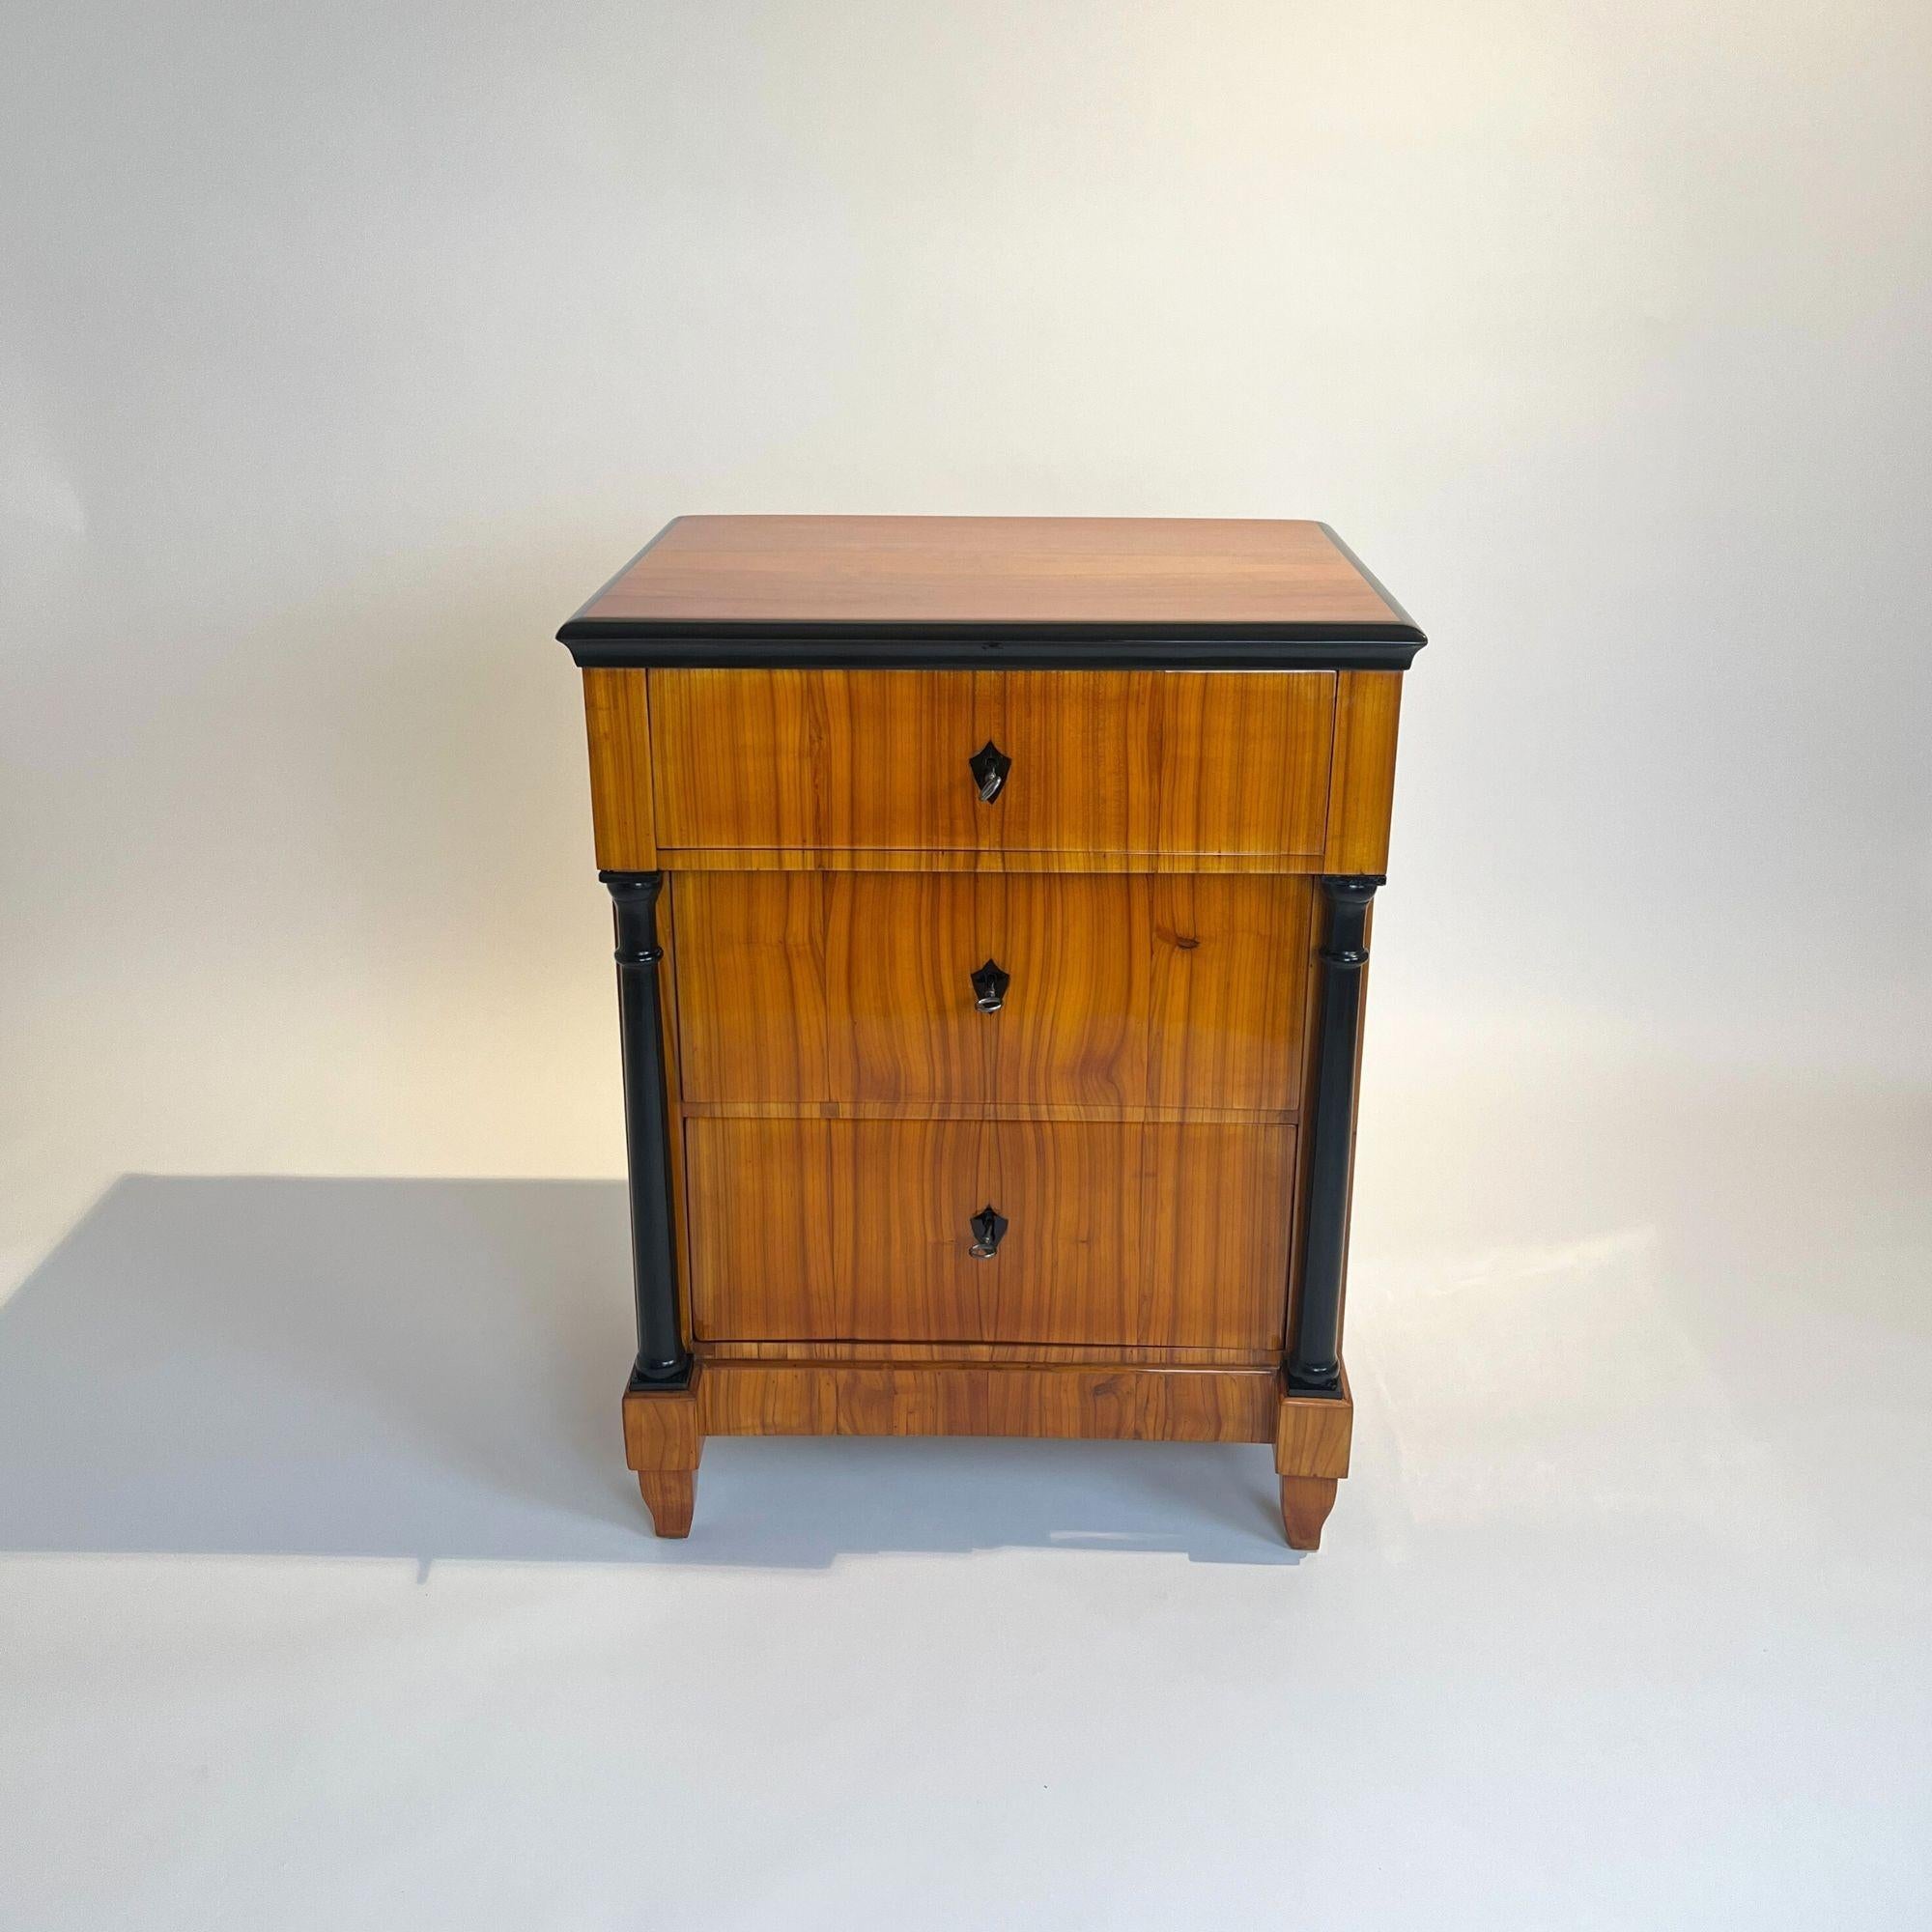 Small Biedermeier commode or chest of drawers in cherrywood from South Germany circa 1830.

Small, elegant, three-drawer Biedermeier commode or chest of drawers from southern Germany around 1830.
Blonde Cherry wood veneered on softwood and solid